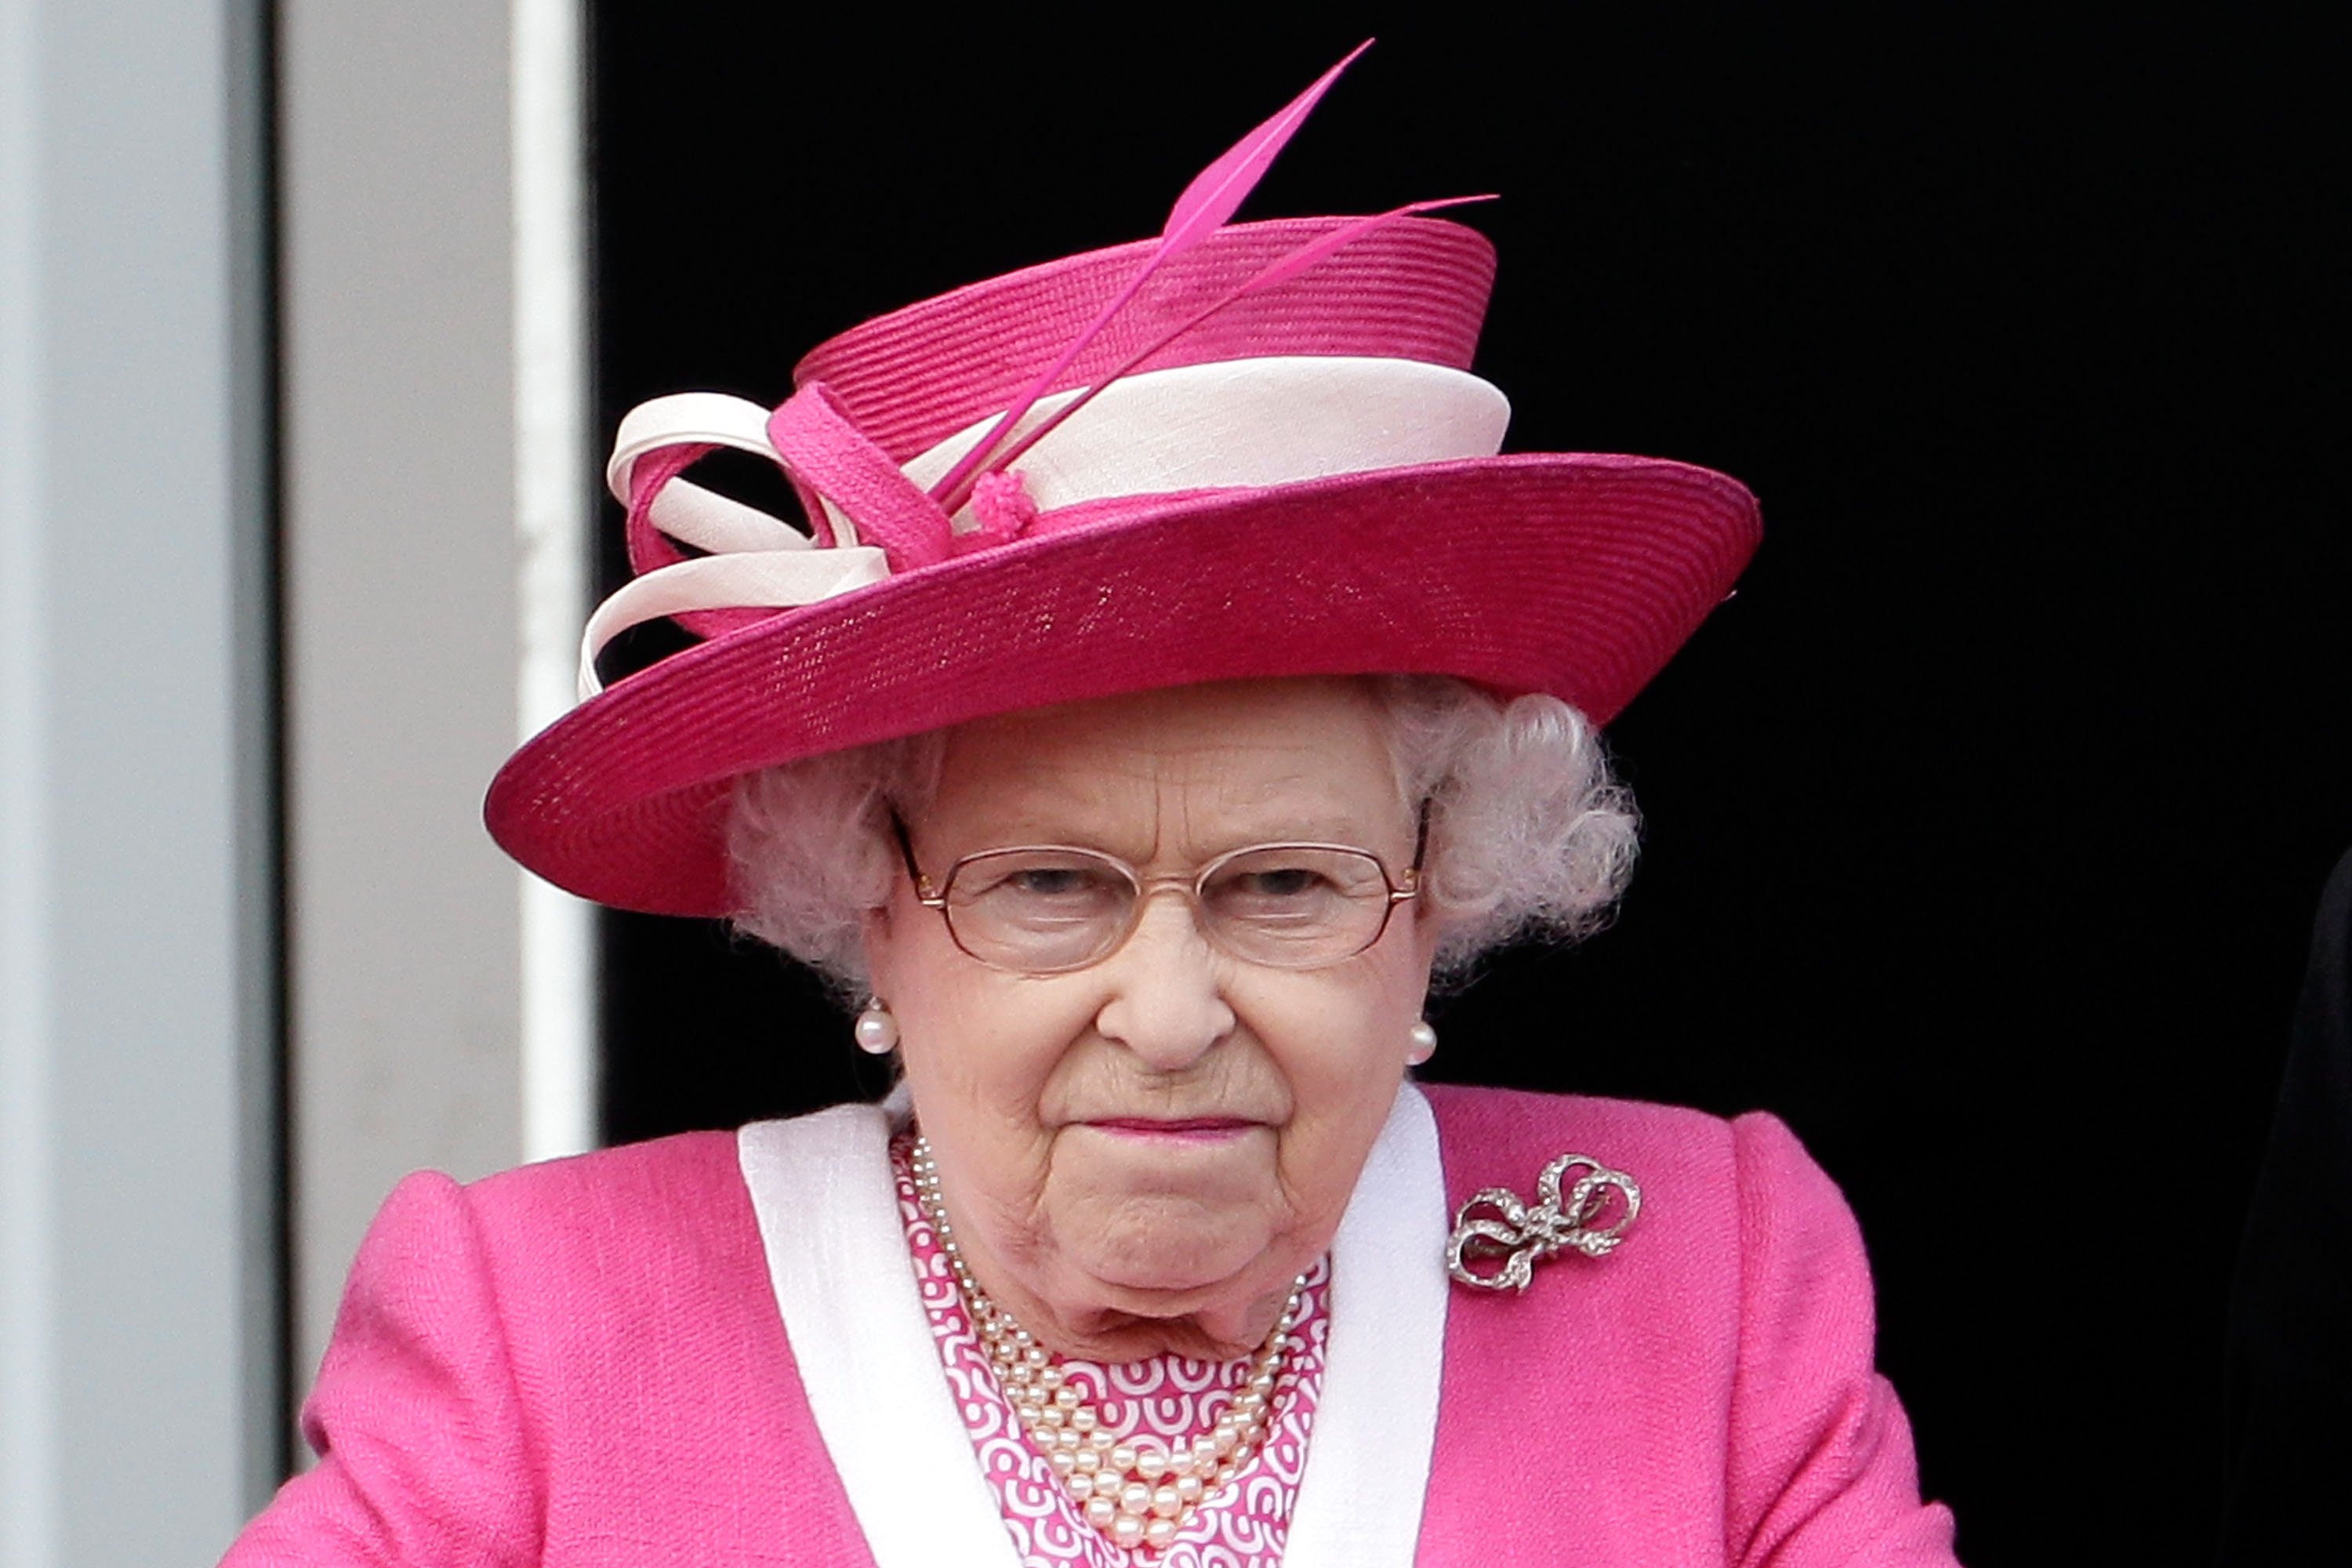 Queen Elizabeth II at Epsom Downs racecourse on June 4, 2011 in Epsom, England | Photo: Getty Images